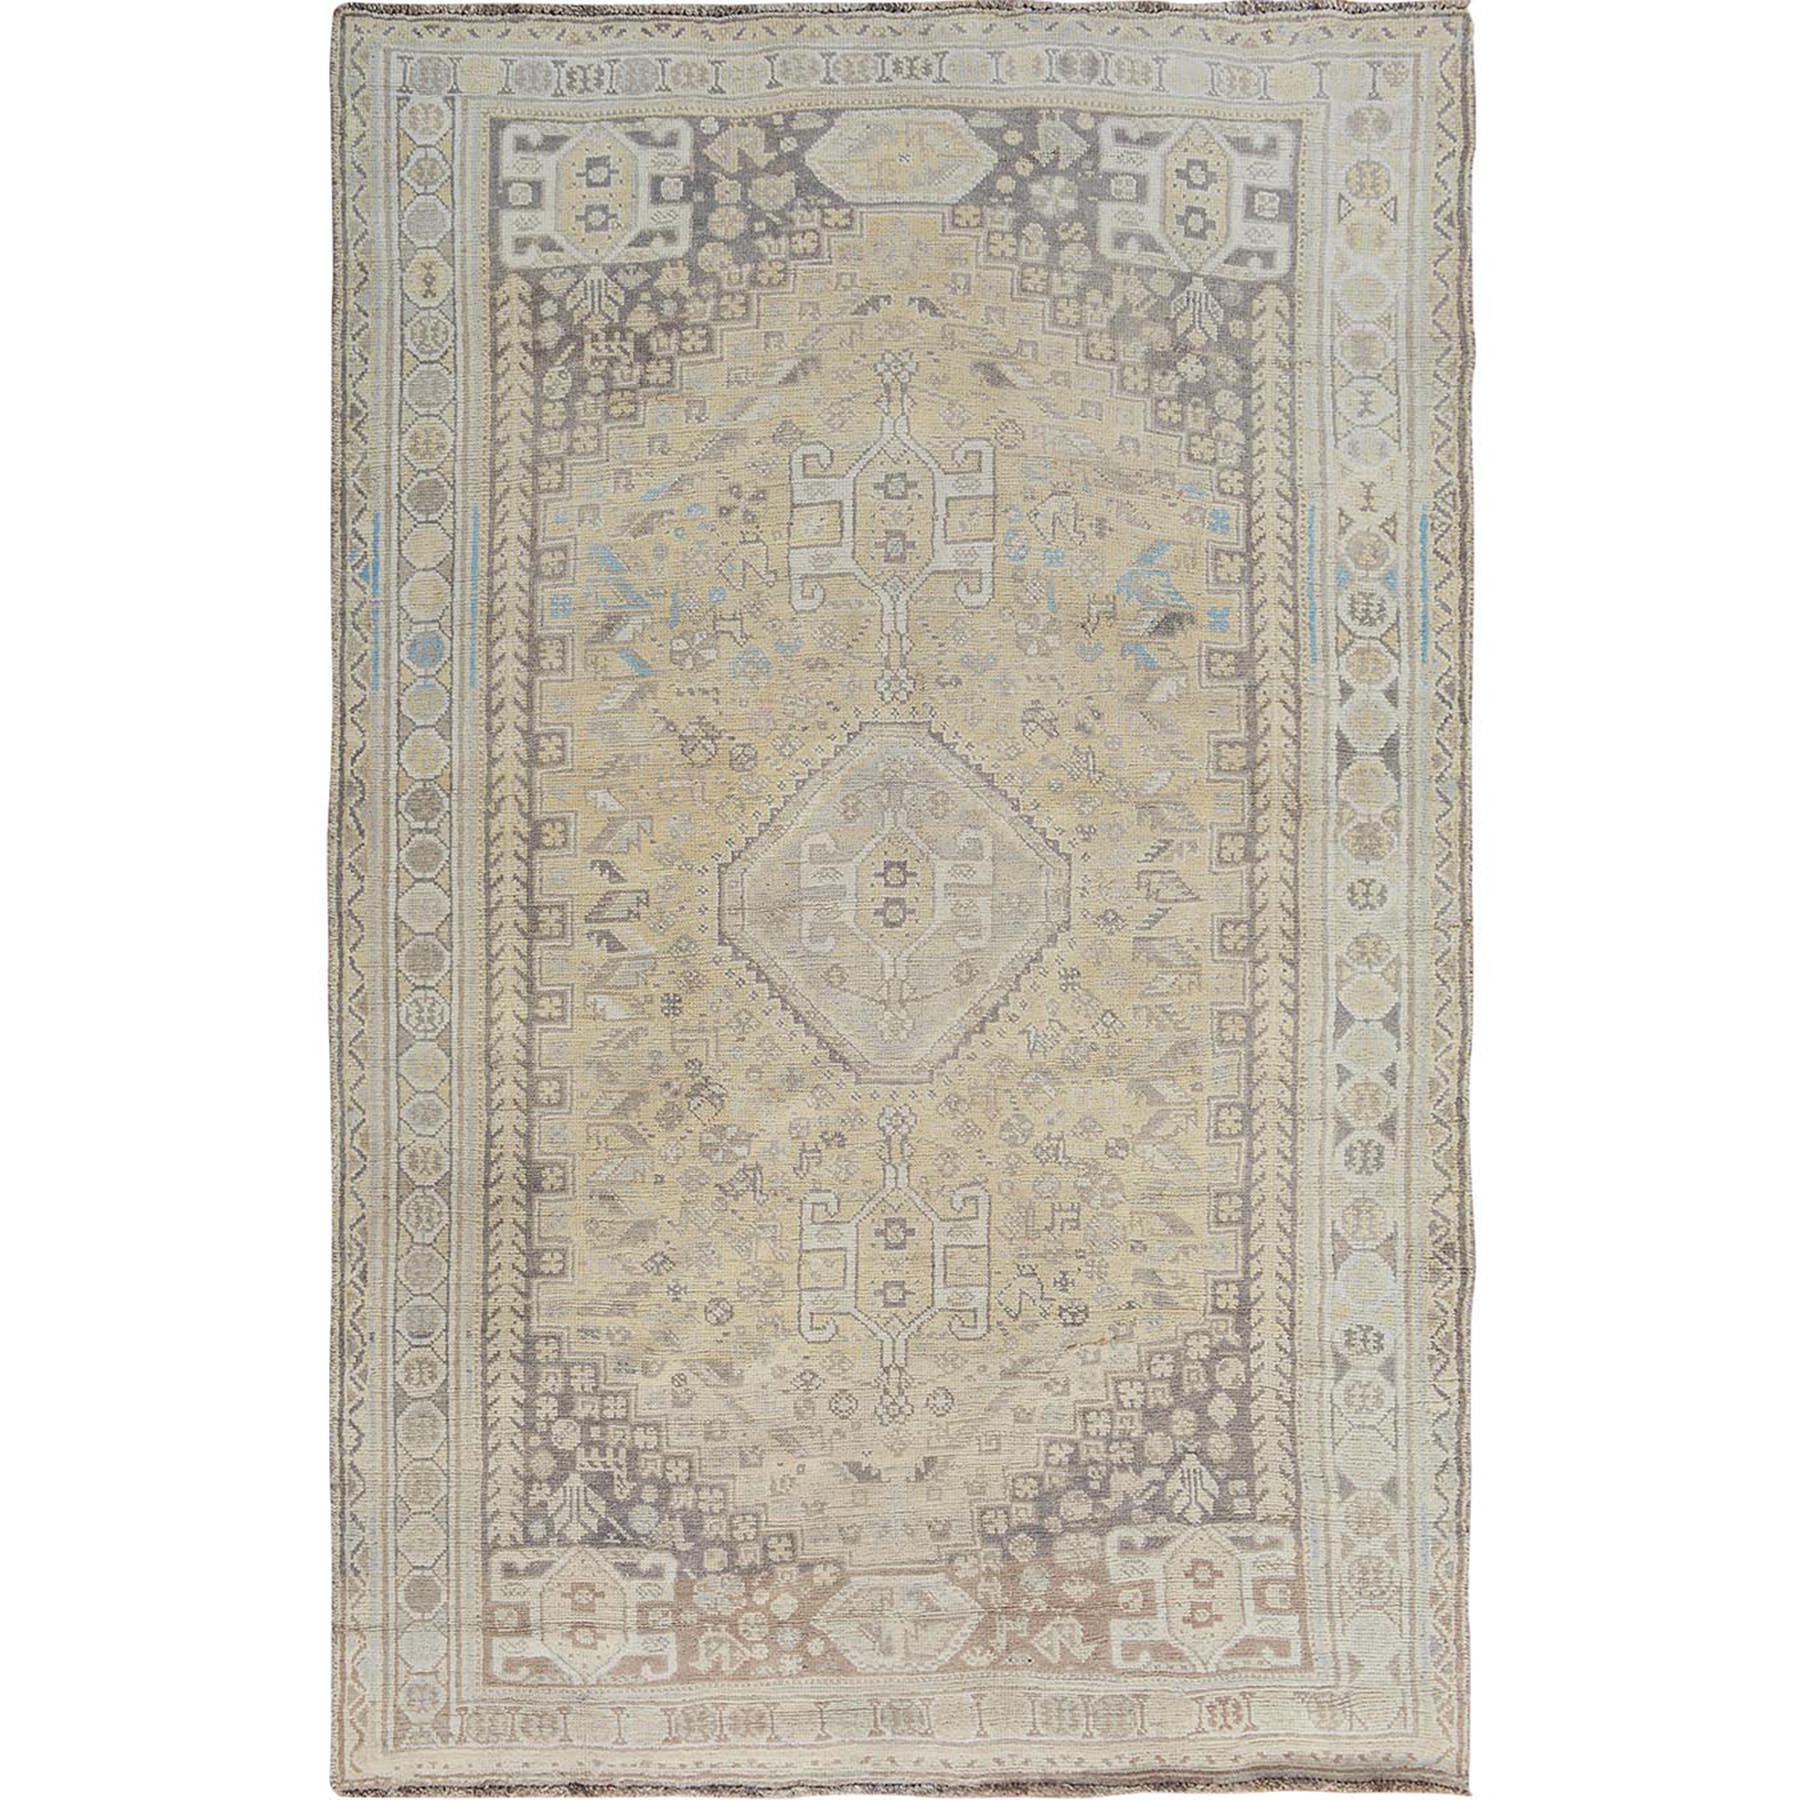 5'4"X8'2" Distressed Colors Vintage And Worn Down Persian Qashqai Pure Wool Oriental Rug moae7ba9